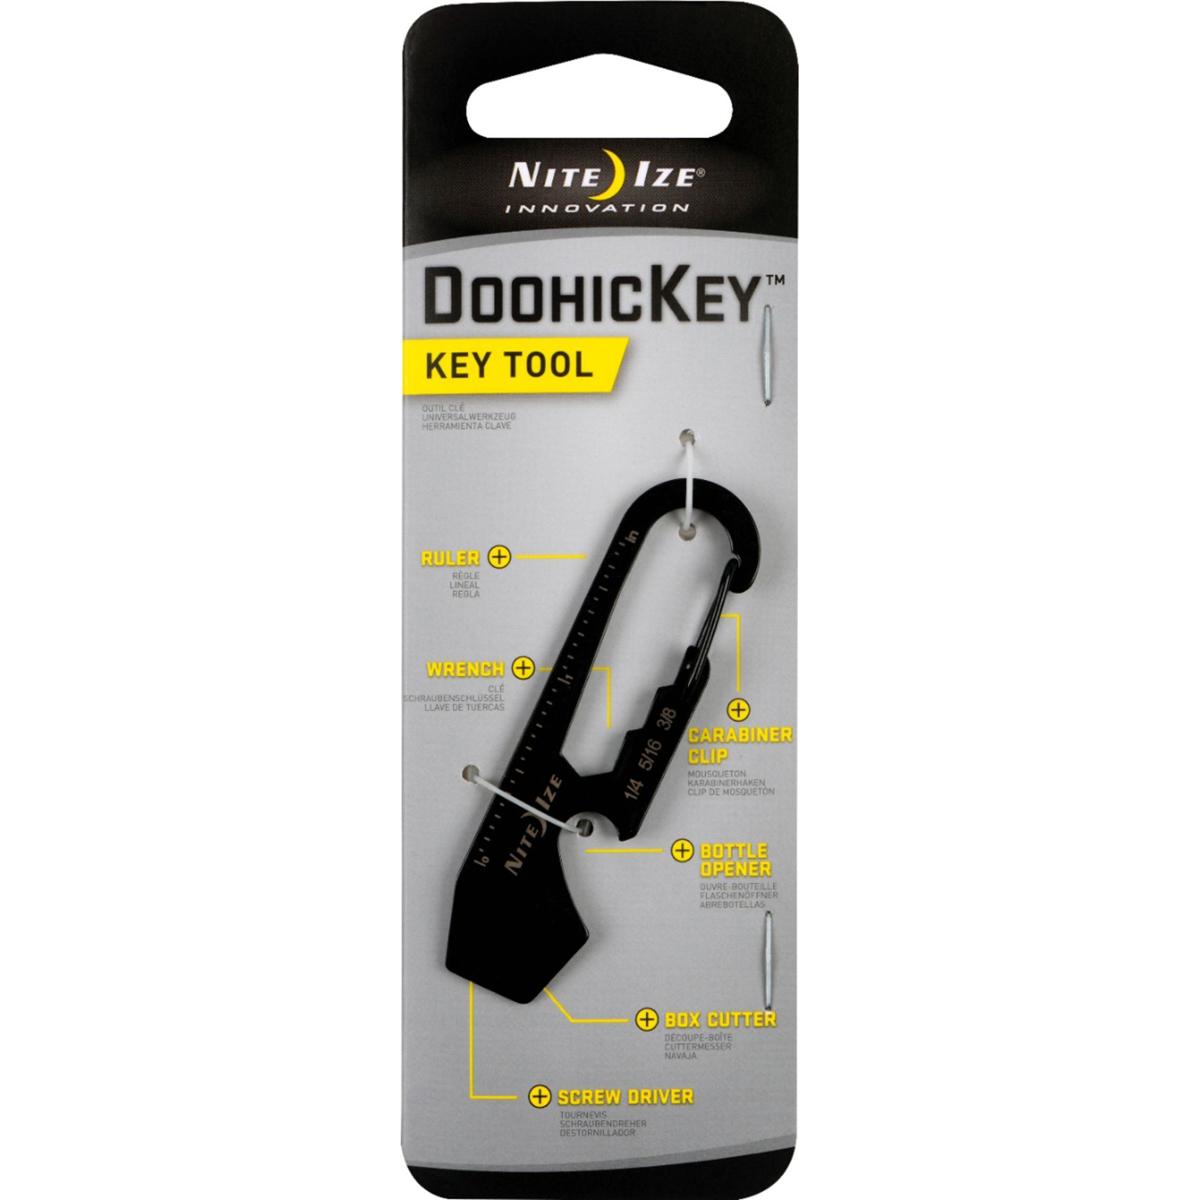 Nite Ize DoohicKey 5-in-1 Multi Tool Keychain for $2.99